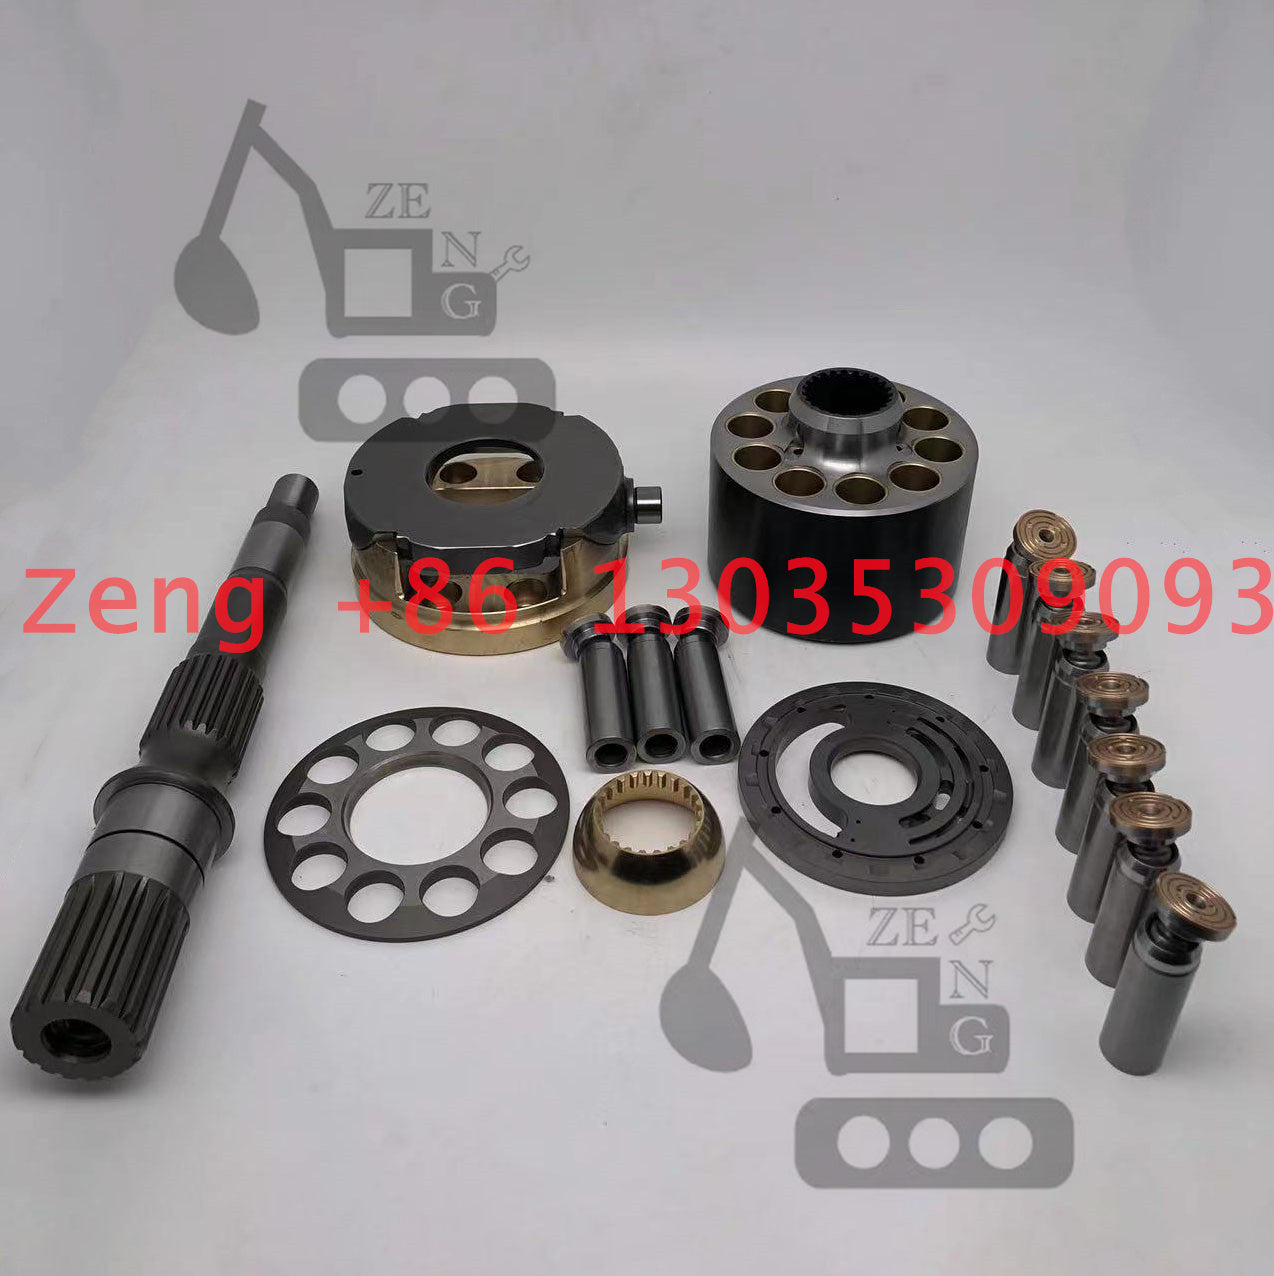 Komatsu HPD56 LPD56 hydraulic pump rotory group and spare parts for PC120-8 PC128UU-6 PC130-8 PC138-8 excavator